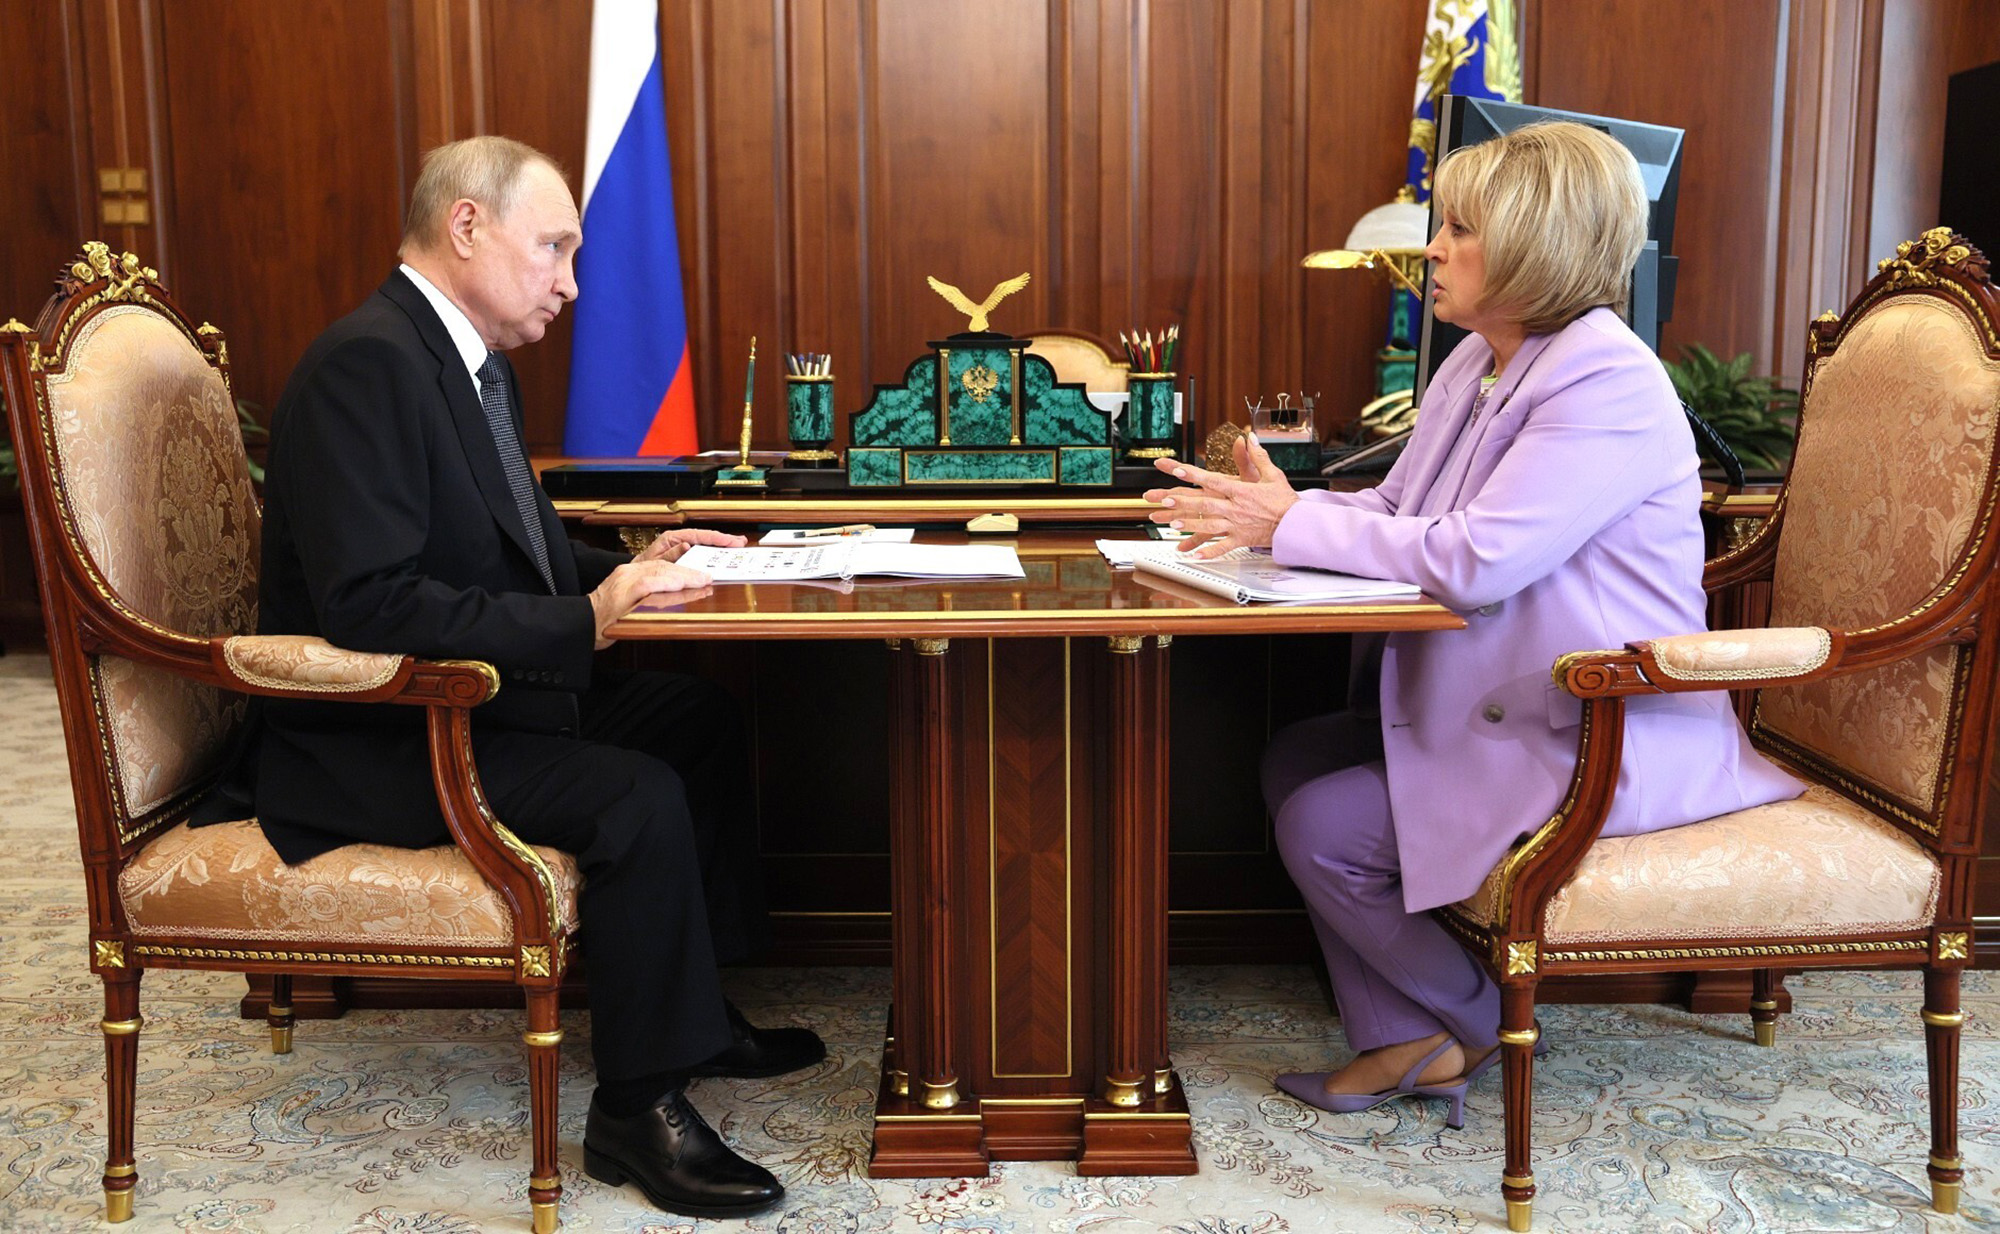 Russian President Vladimir Putin meets with the country's Central Election Commission head Ella Pamfilova at the Kremlin in Moscow, Russia, on July 3.